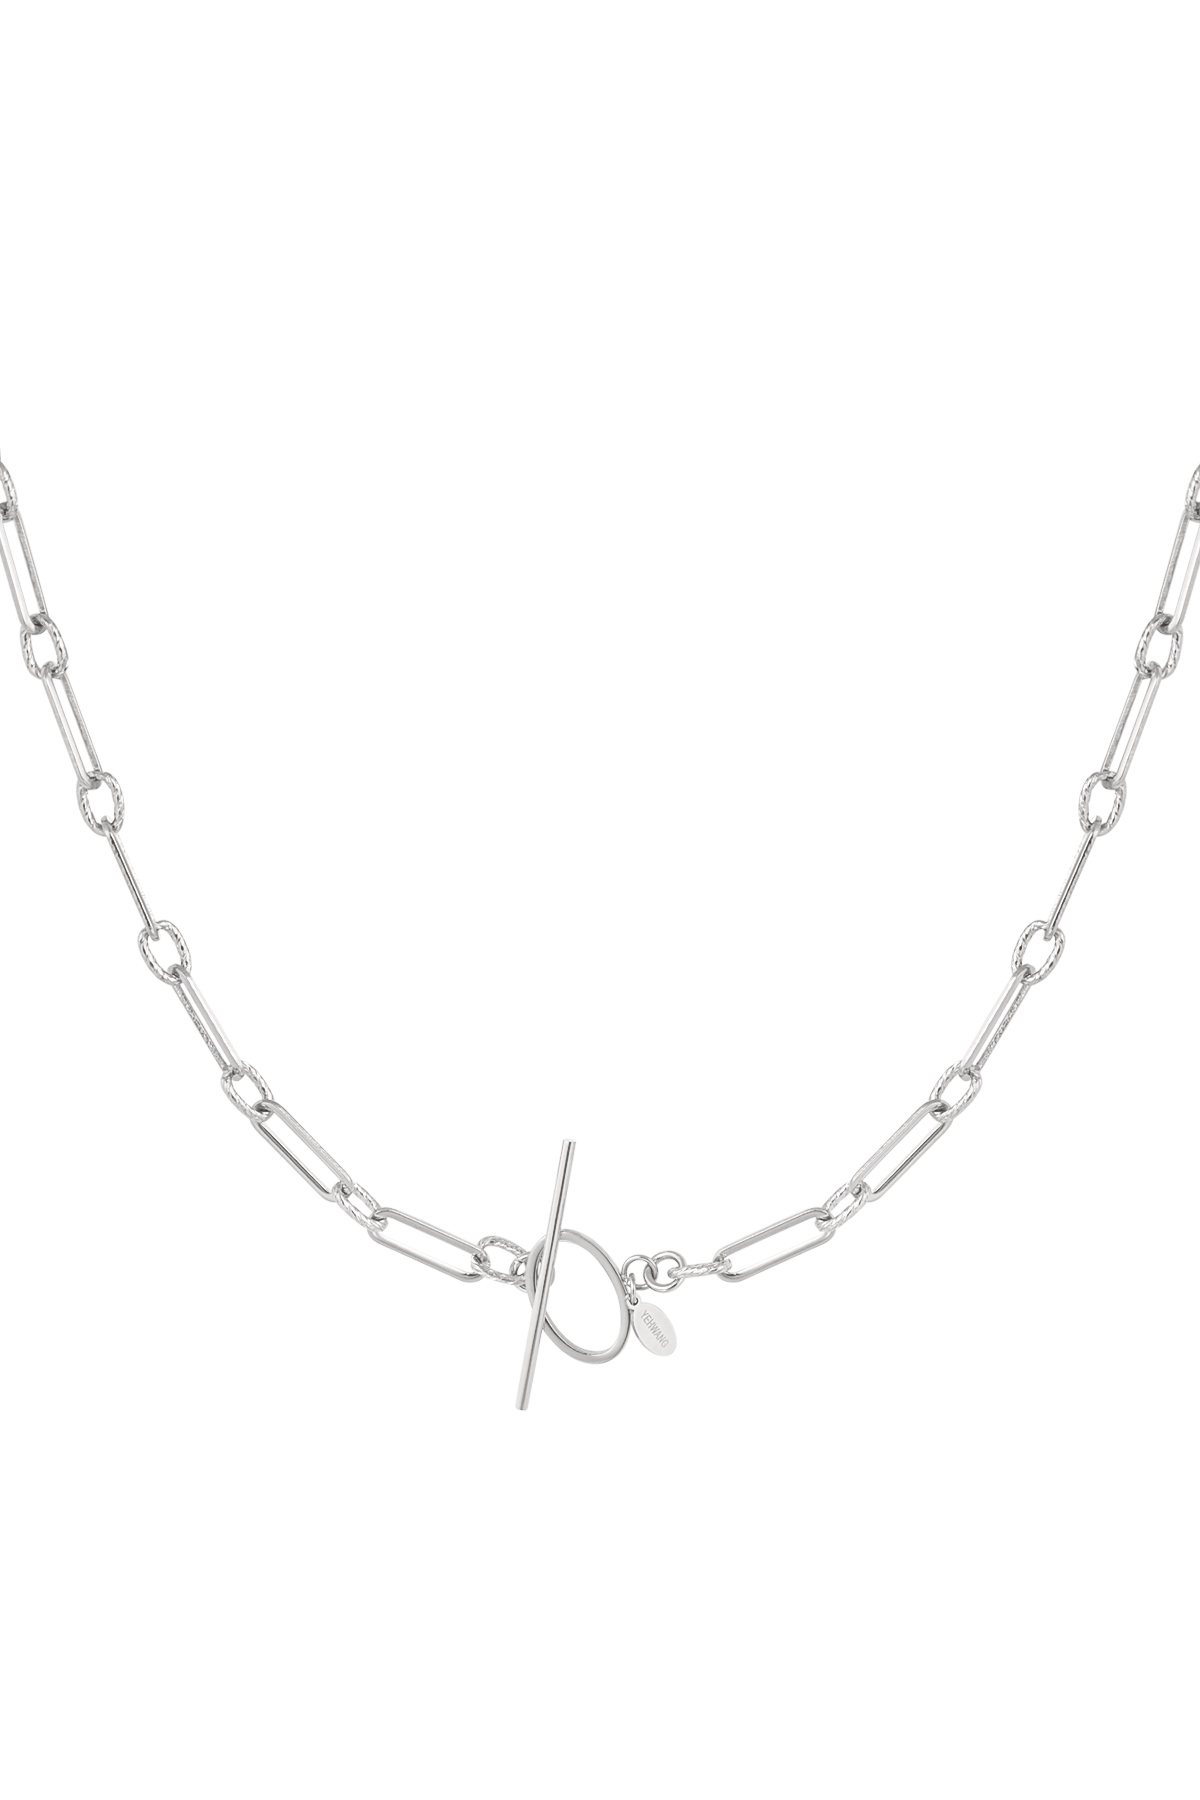 Link chain thin with round closure - silver h5 